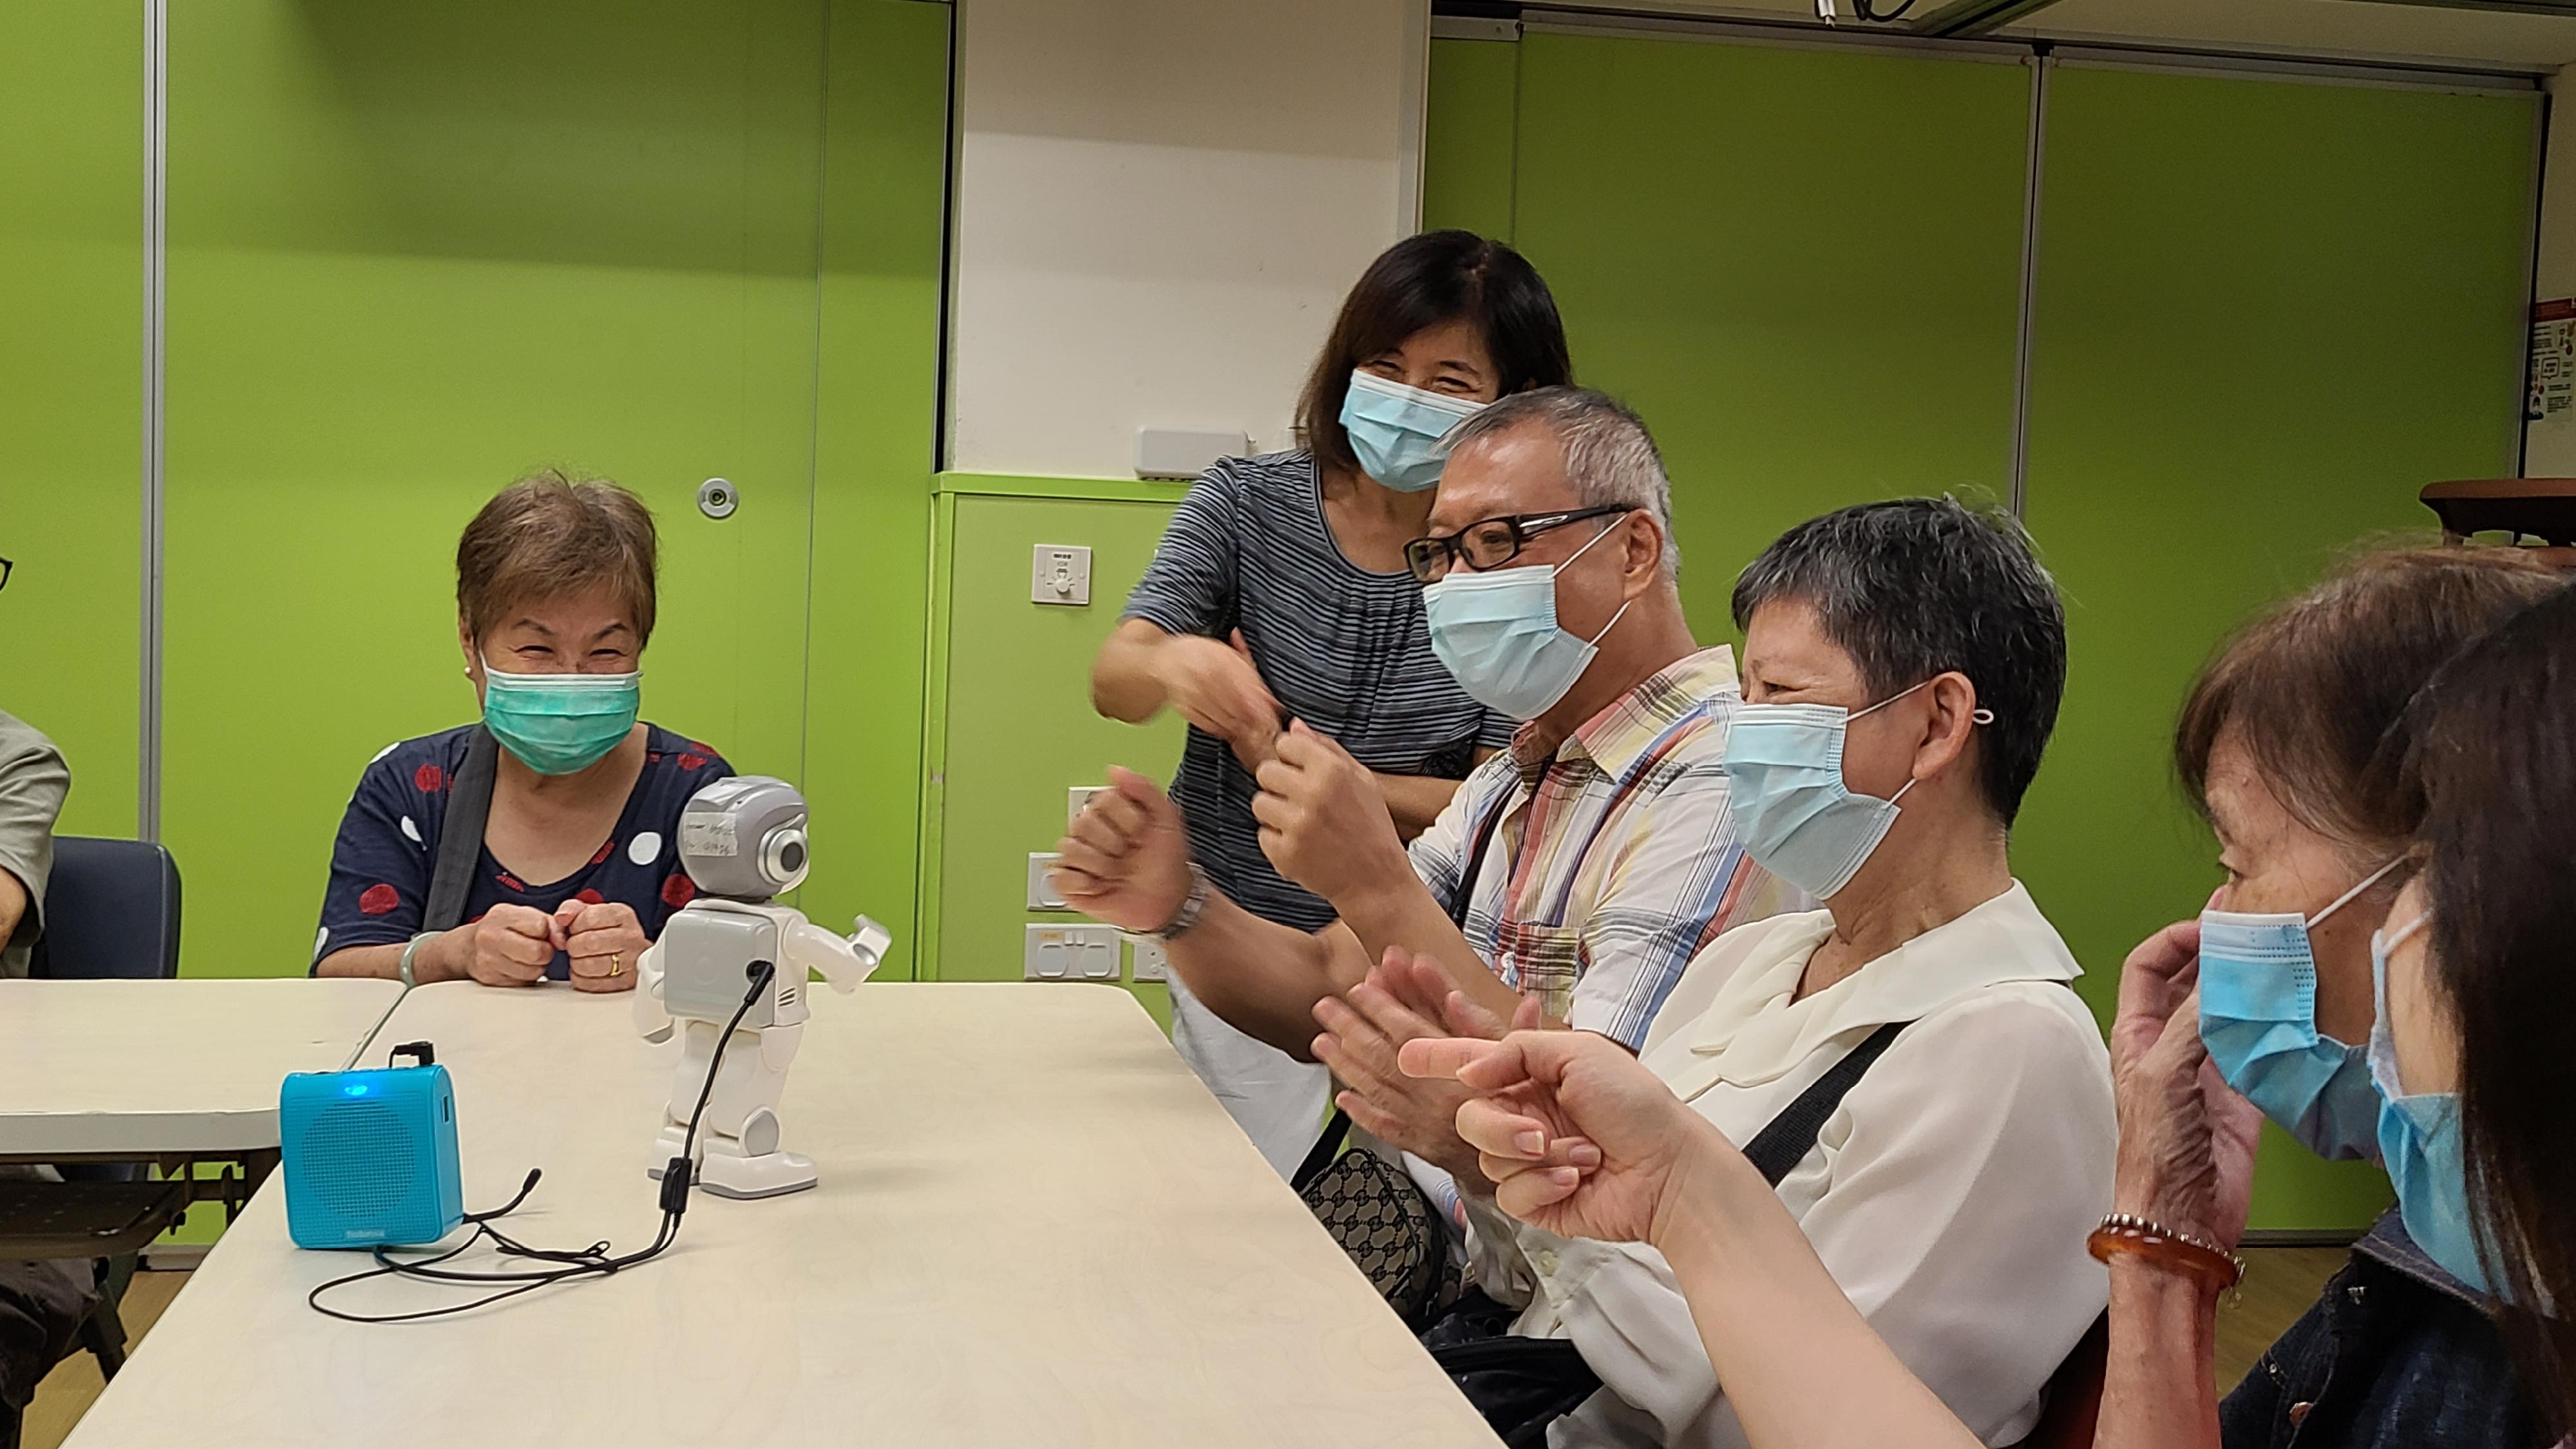 The Office of the Government Chief Information Officer announced today (June 14) that a new round of the ICT Outreach Programme for the Elderly was launched. Photo shows elderly people in the previous round of the Programme interacting with a robot.